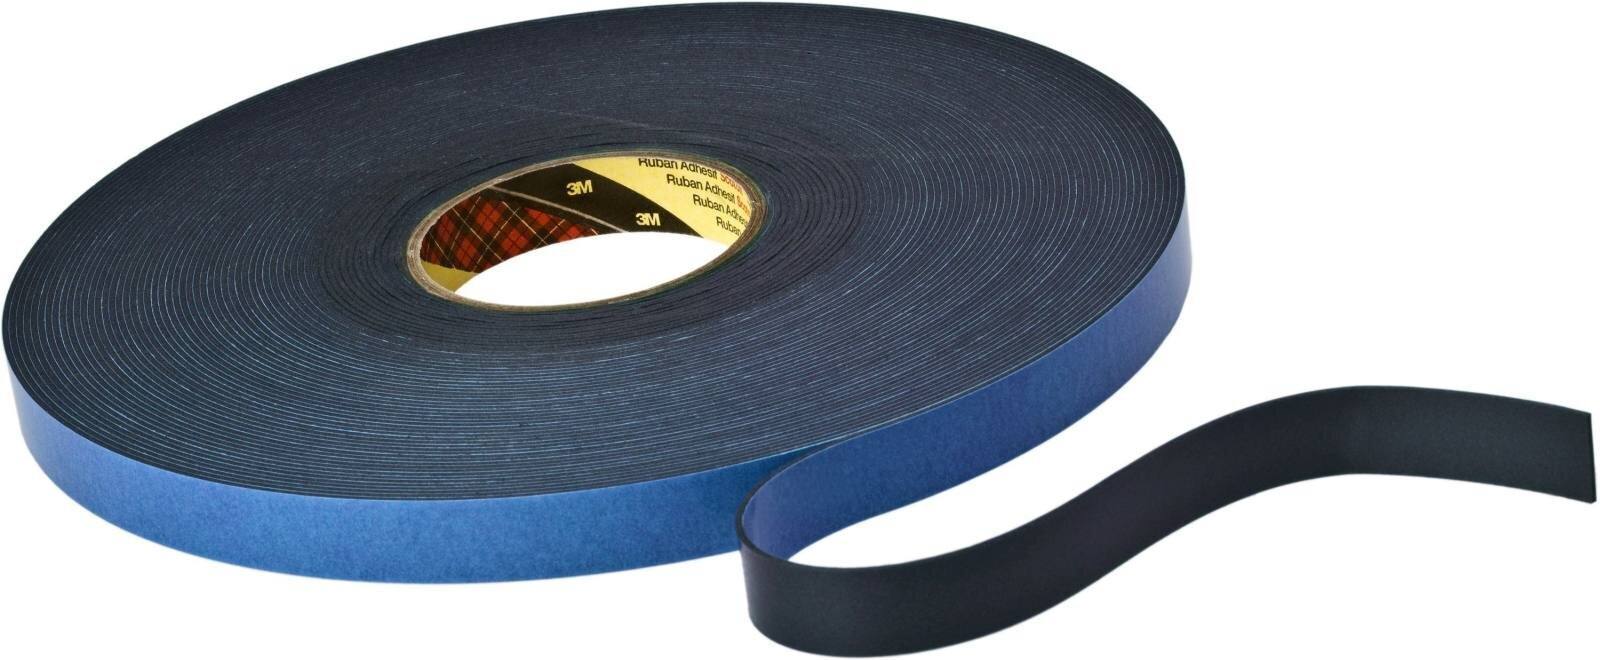 3M Double-sided adhesive tape with polyethylene foam backing 9585 BF, black, 1000 mm x 66m,